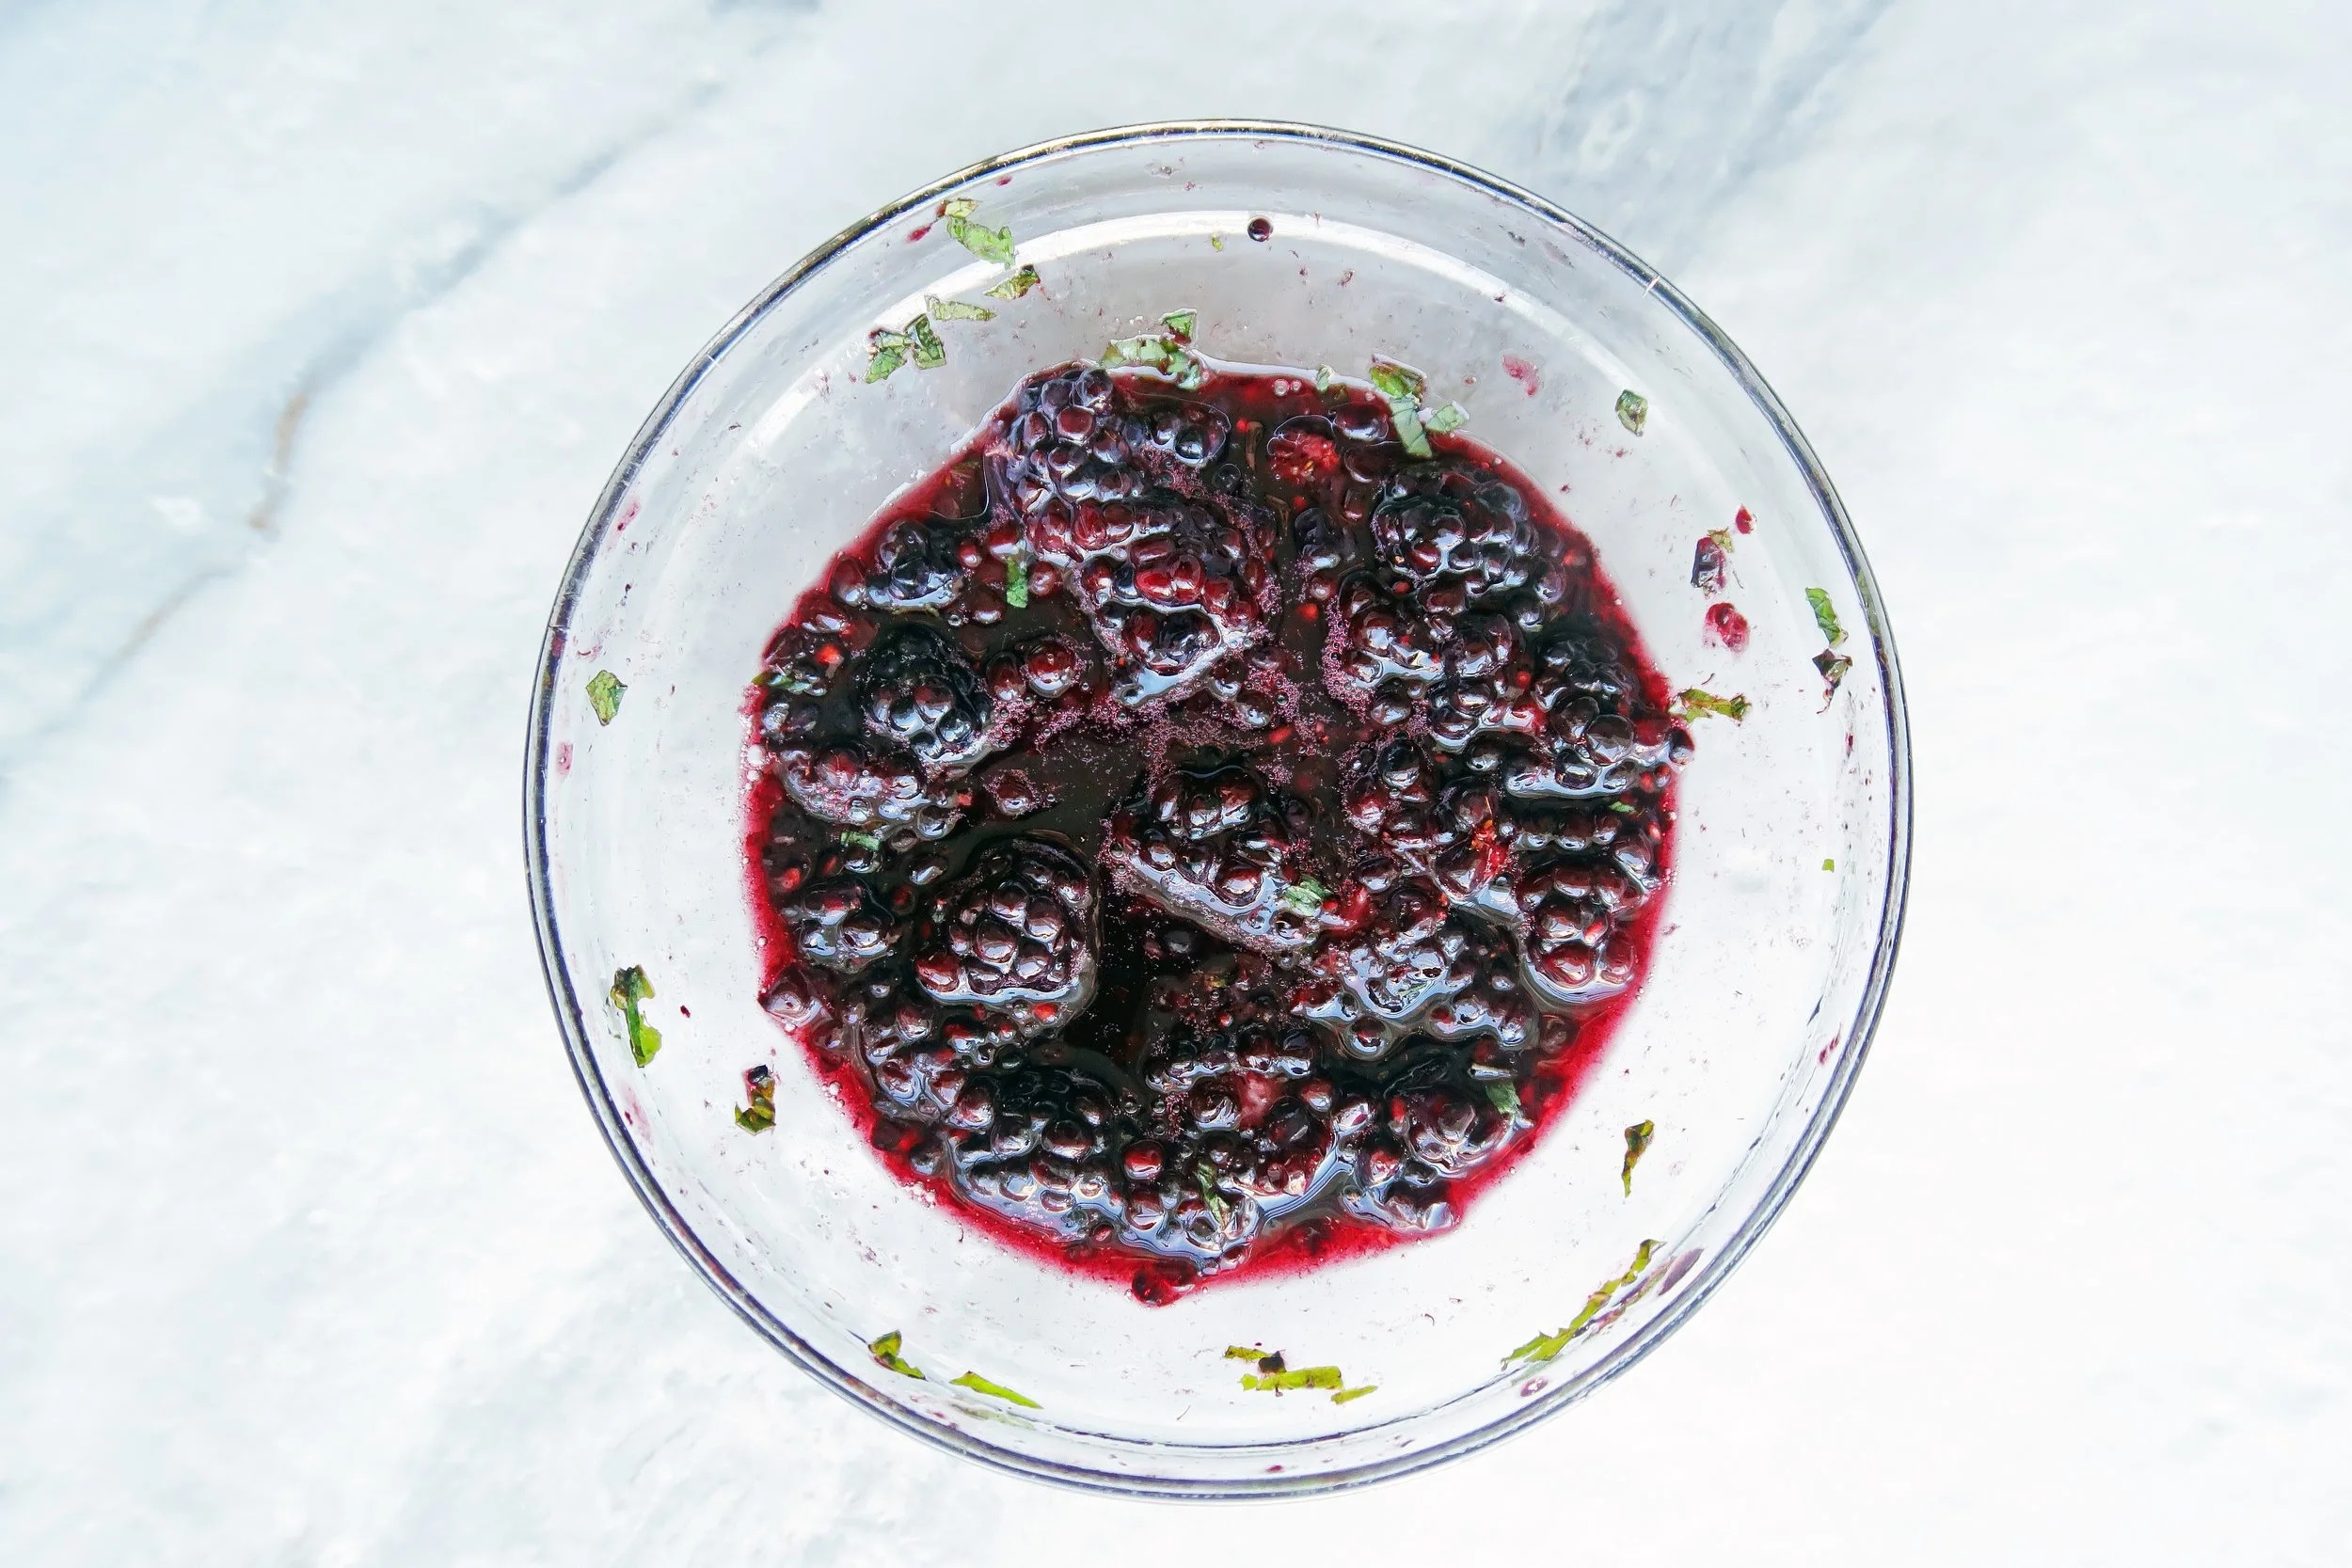 Macerated blackberries and mint in a bowl.